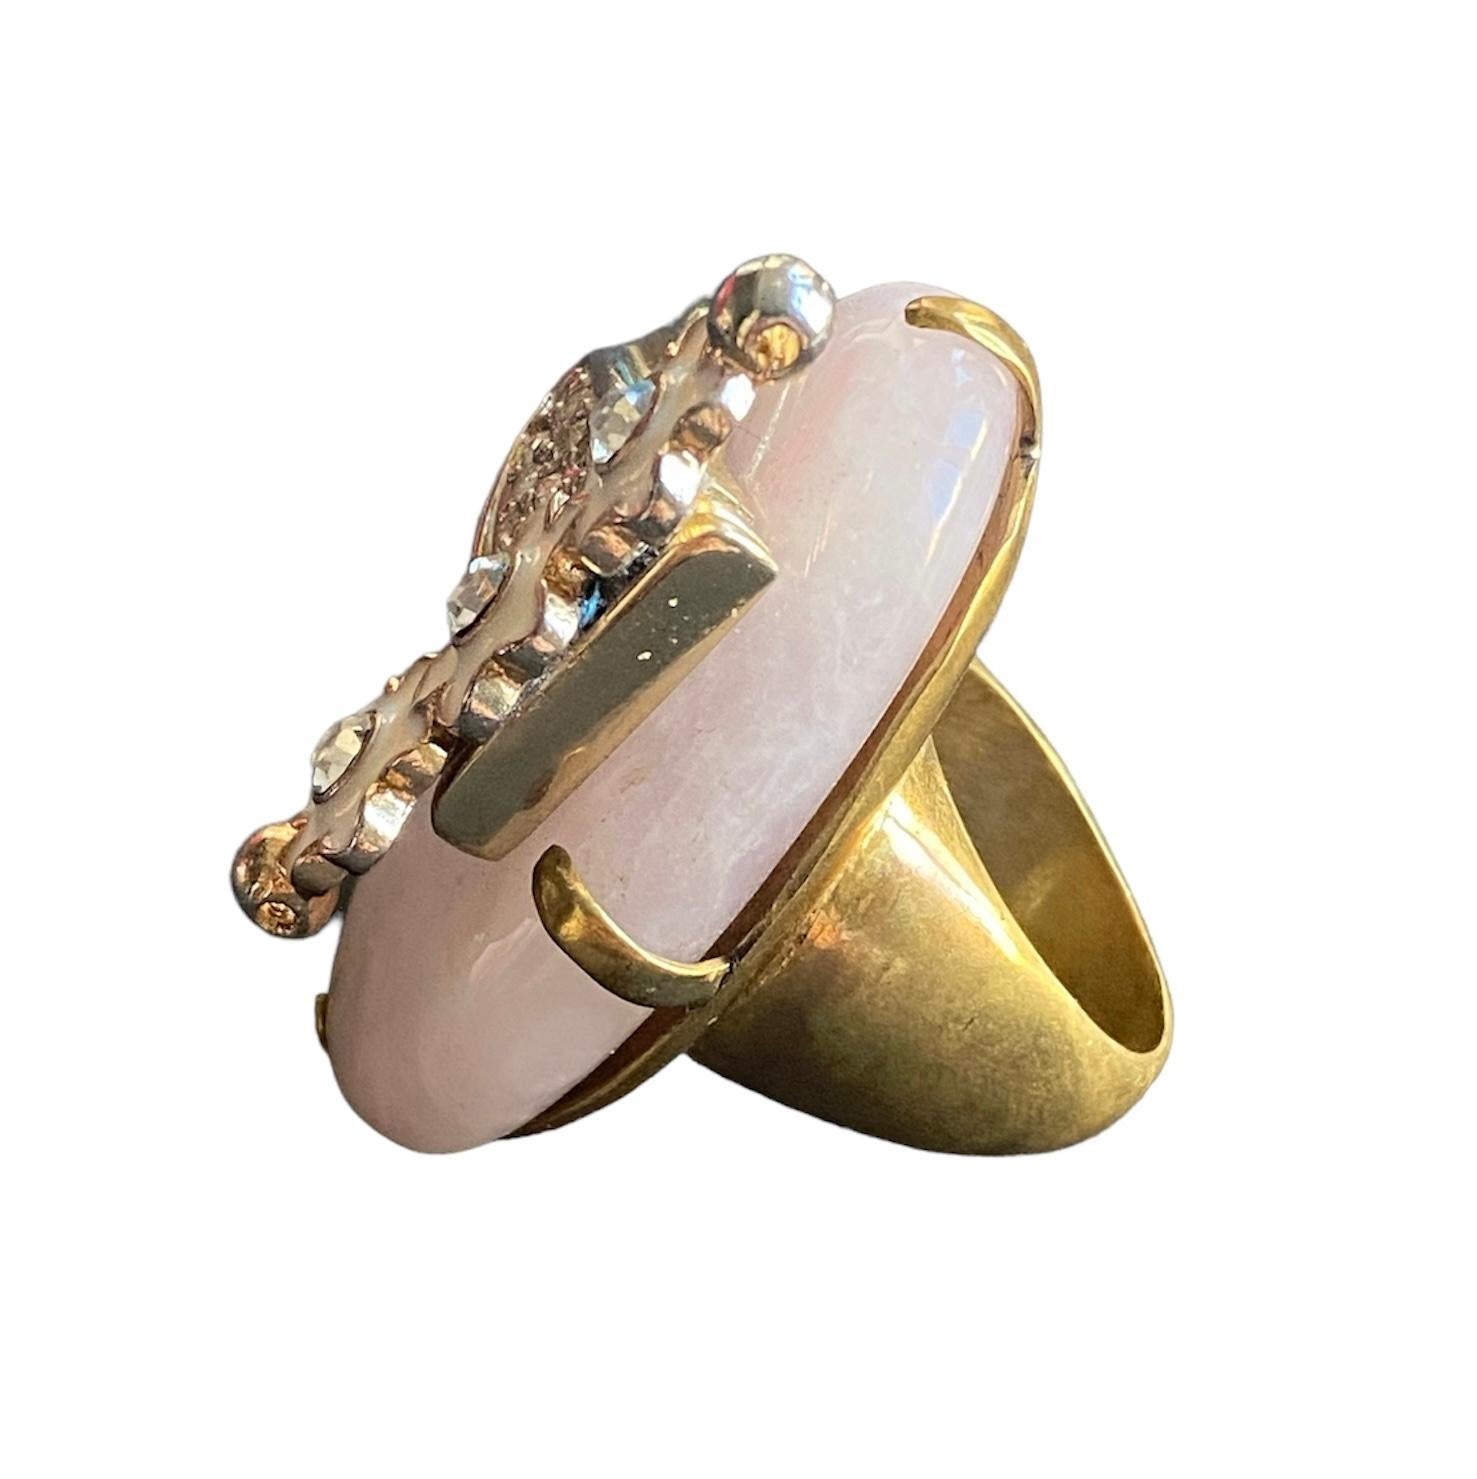 Artisan One Off Ring. High Upcycling. Quartz, Gold Plated Bronze & Vintage Elements. For Sale